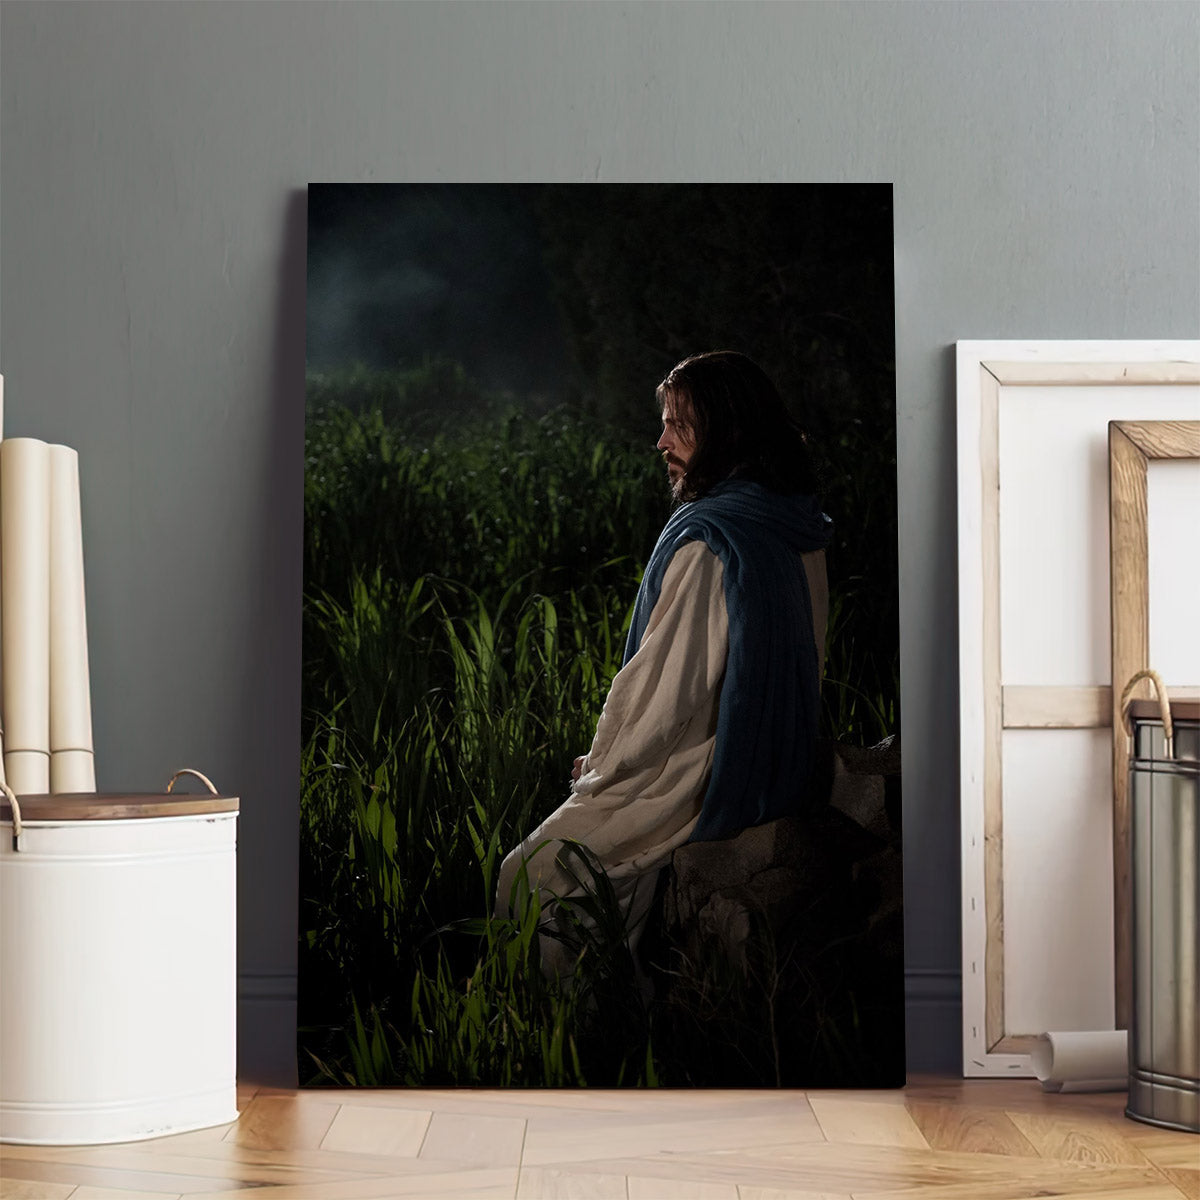 Jesus Agony In The Garden Gethsemane Canvas Pictures - Religious Canvas Wall Art - Christian Paintings For Home